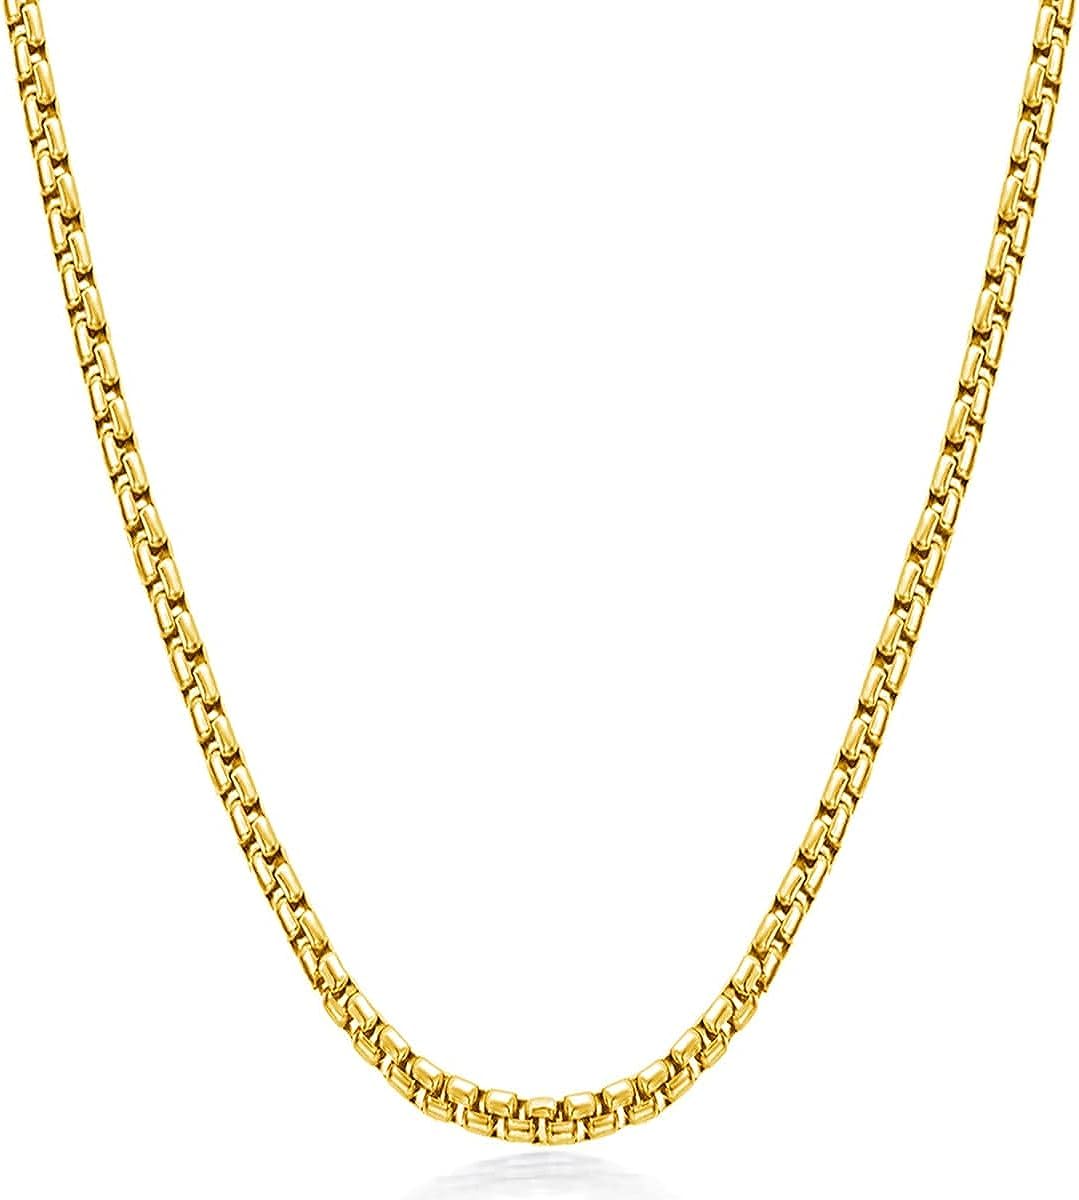 24K Men's 3mm Round Box Gold Plated Chain Necklace - Stylish and Versatile | Premium Stainless Steel | Fashionable Accessory |